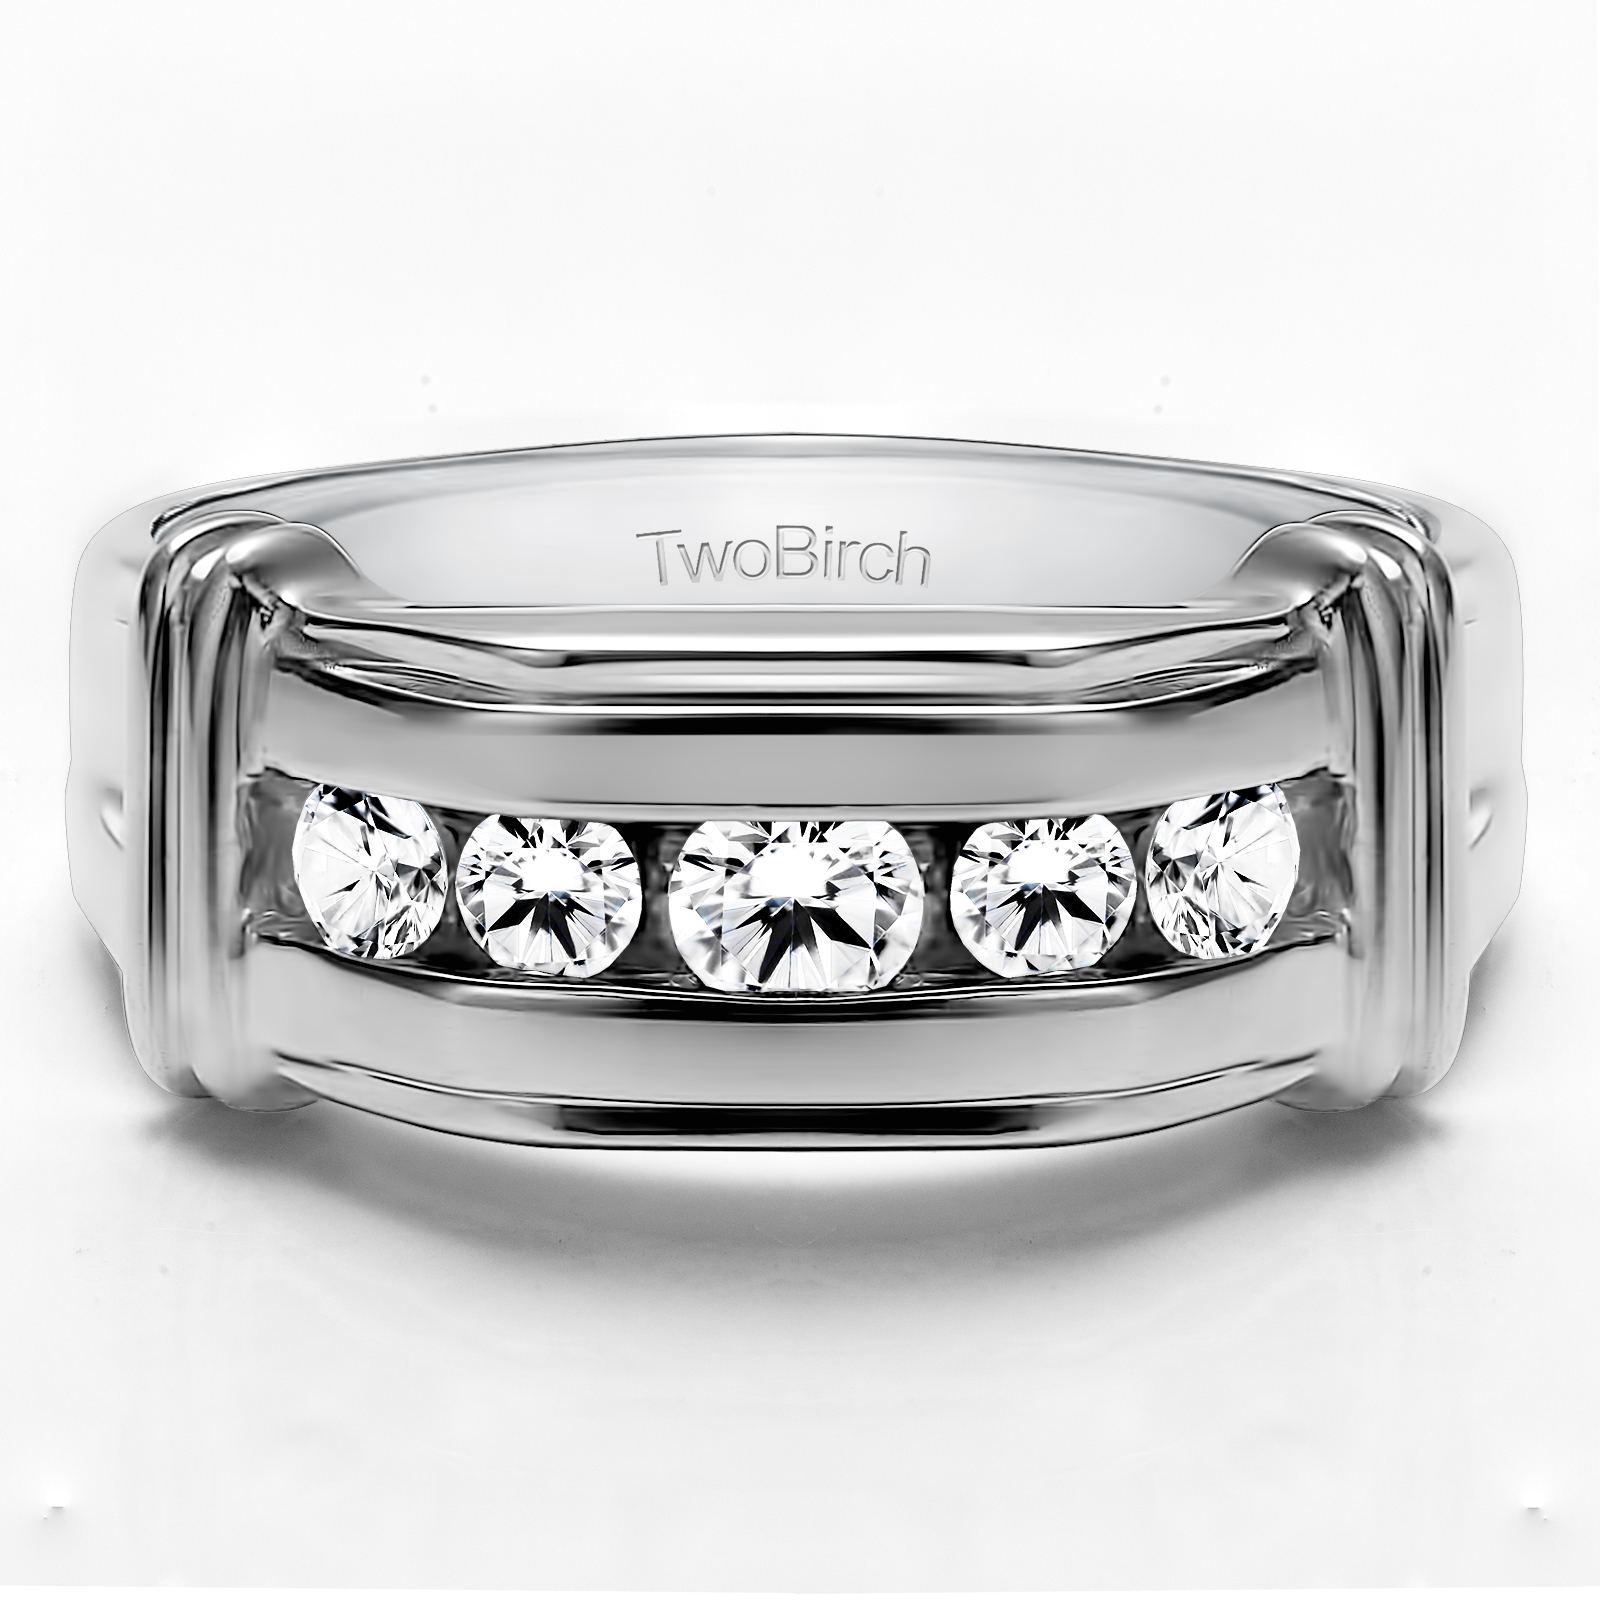 TwoBirch Fine Jewelry - Engagement Rings, Wedding Bands, Ring